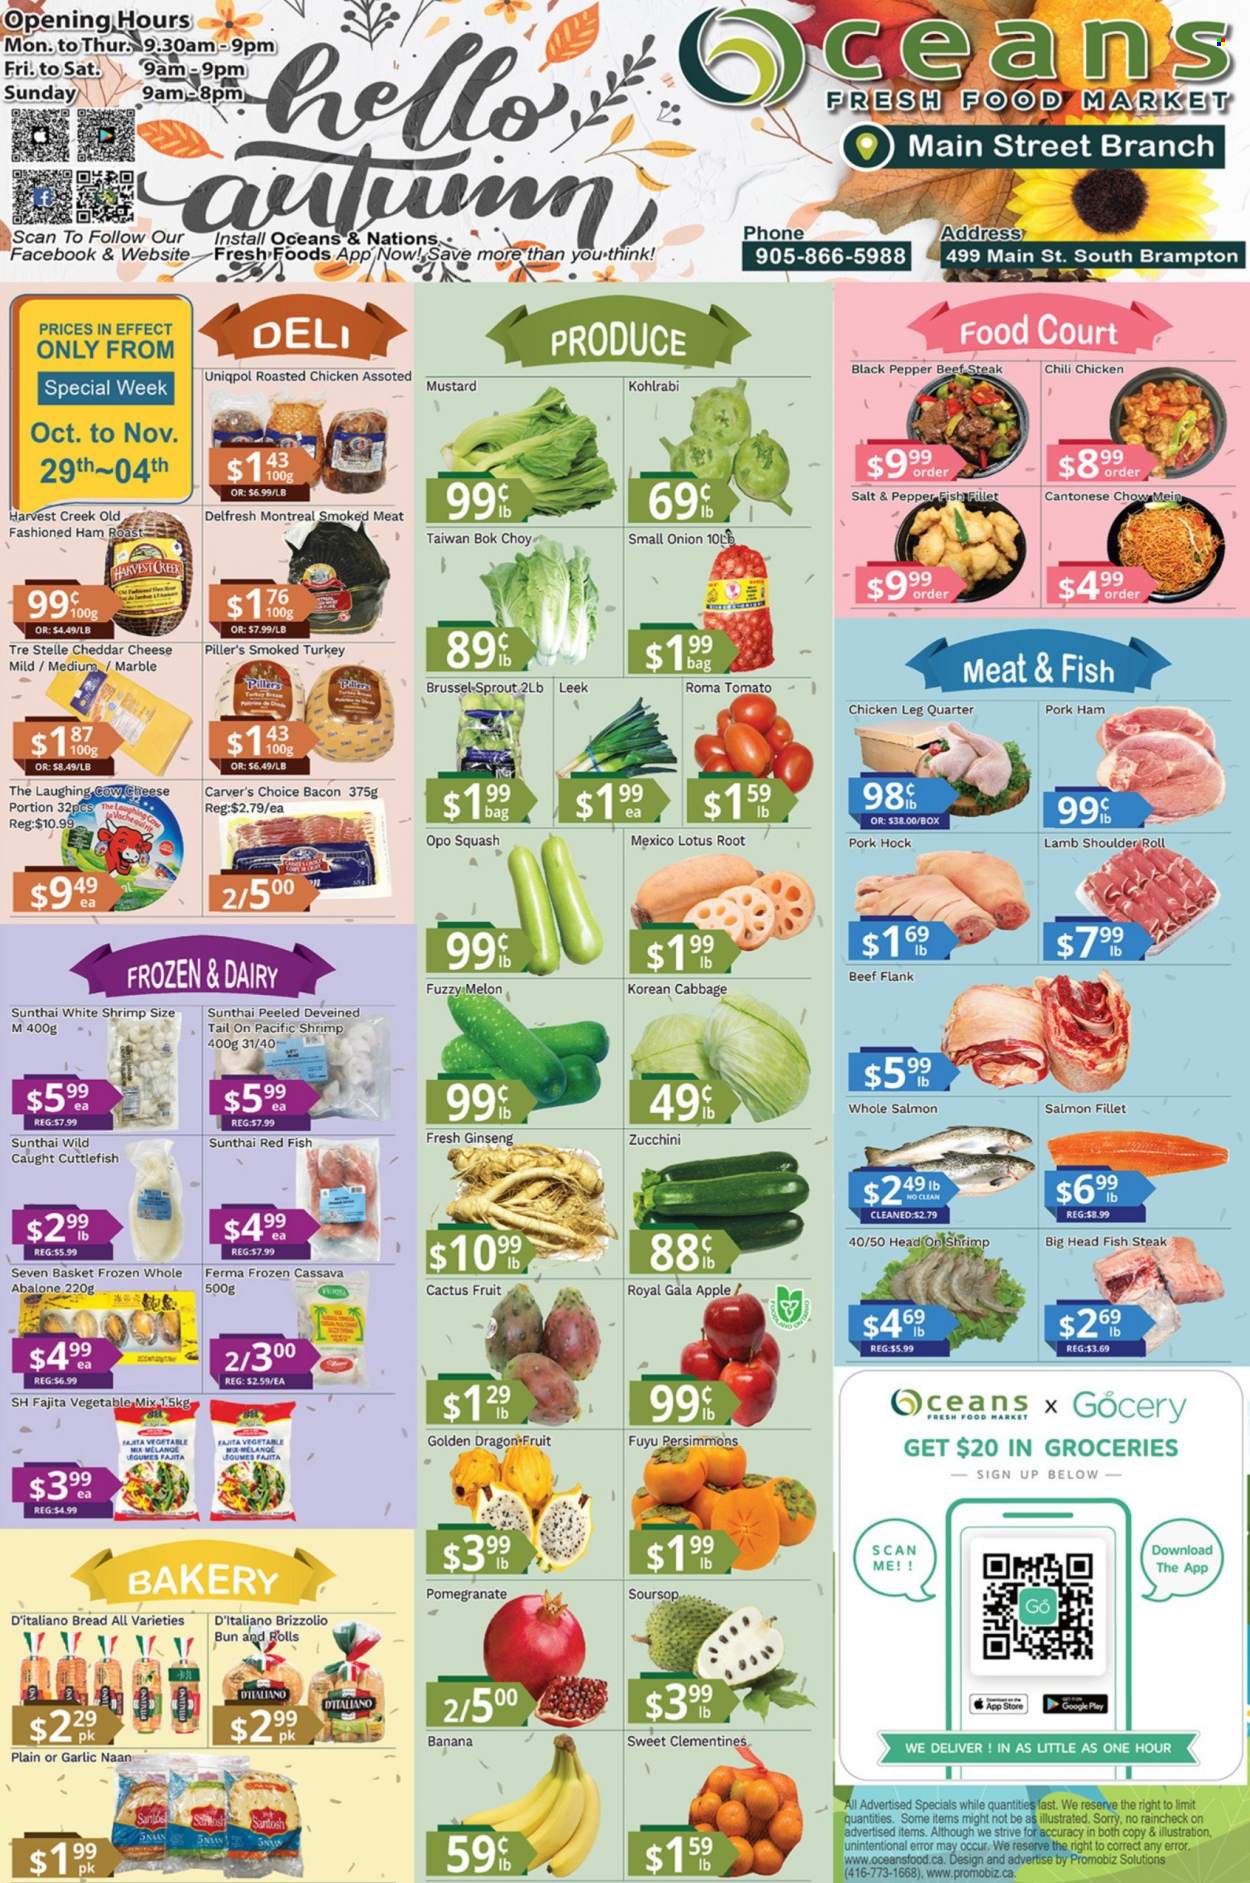 thumbnail - Oceans Flyer - October 29, 2021 - November 04, 2021 - Sales products - bread, bok choy, cabbage, garlic, leek, tomatoes, zucchini, onion, cassava, clementines, Gala, persimmons, melons, pomegranate, dragon fruit, cuttlefish, fish fillets, salmon, salmon fillet, fish, shrimps, abalone, fish steak, chicken roast, fajita, bacon, ham, cheddar, cheese, The Laughing Cow, black pepper, mustard, chicken legs, turkey, beef meat, beef steak, pork hock, pork meat, lamb meat, lamb shoulder, Lotus, ginseng, kohlrabi, steak. Page 1.